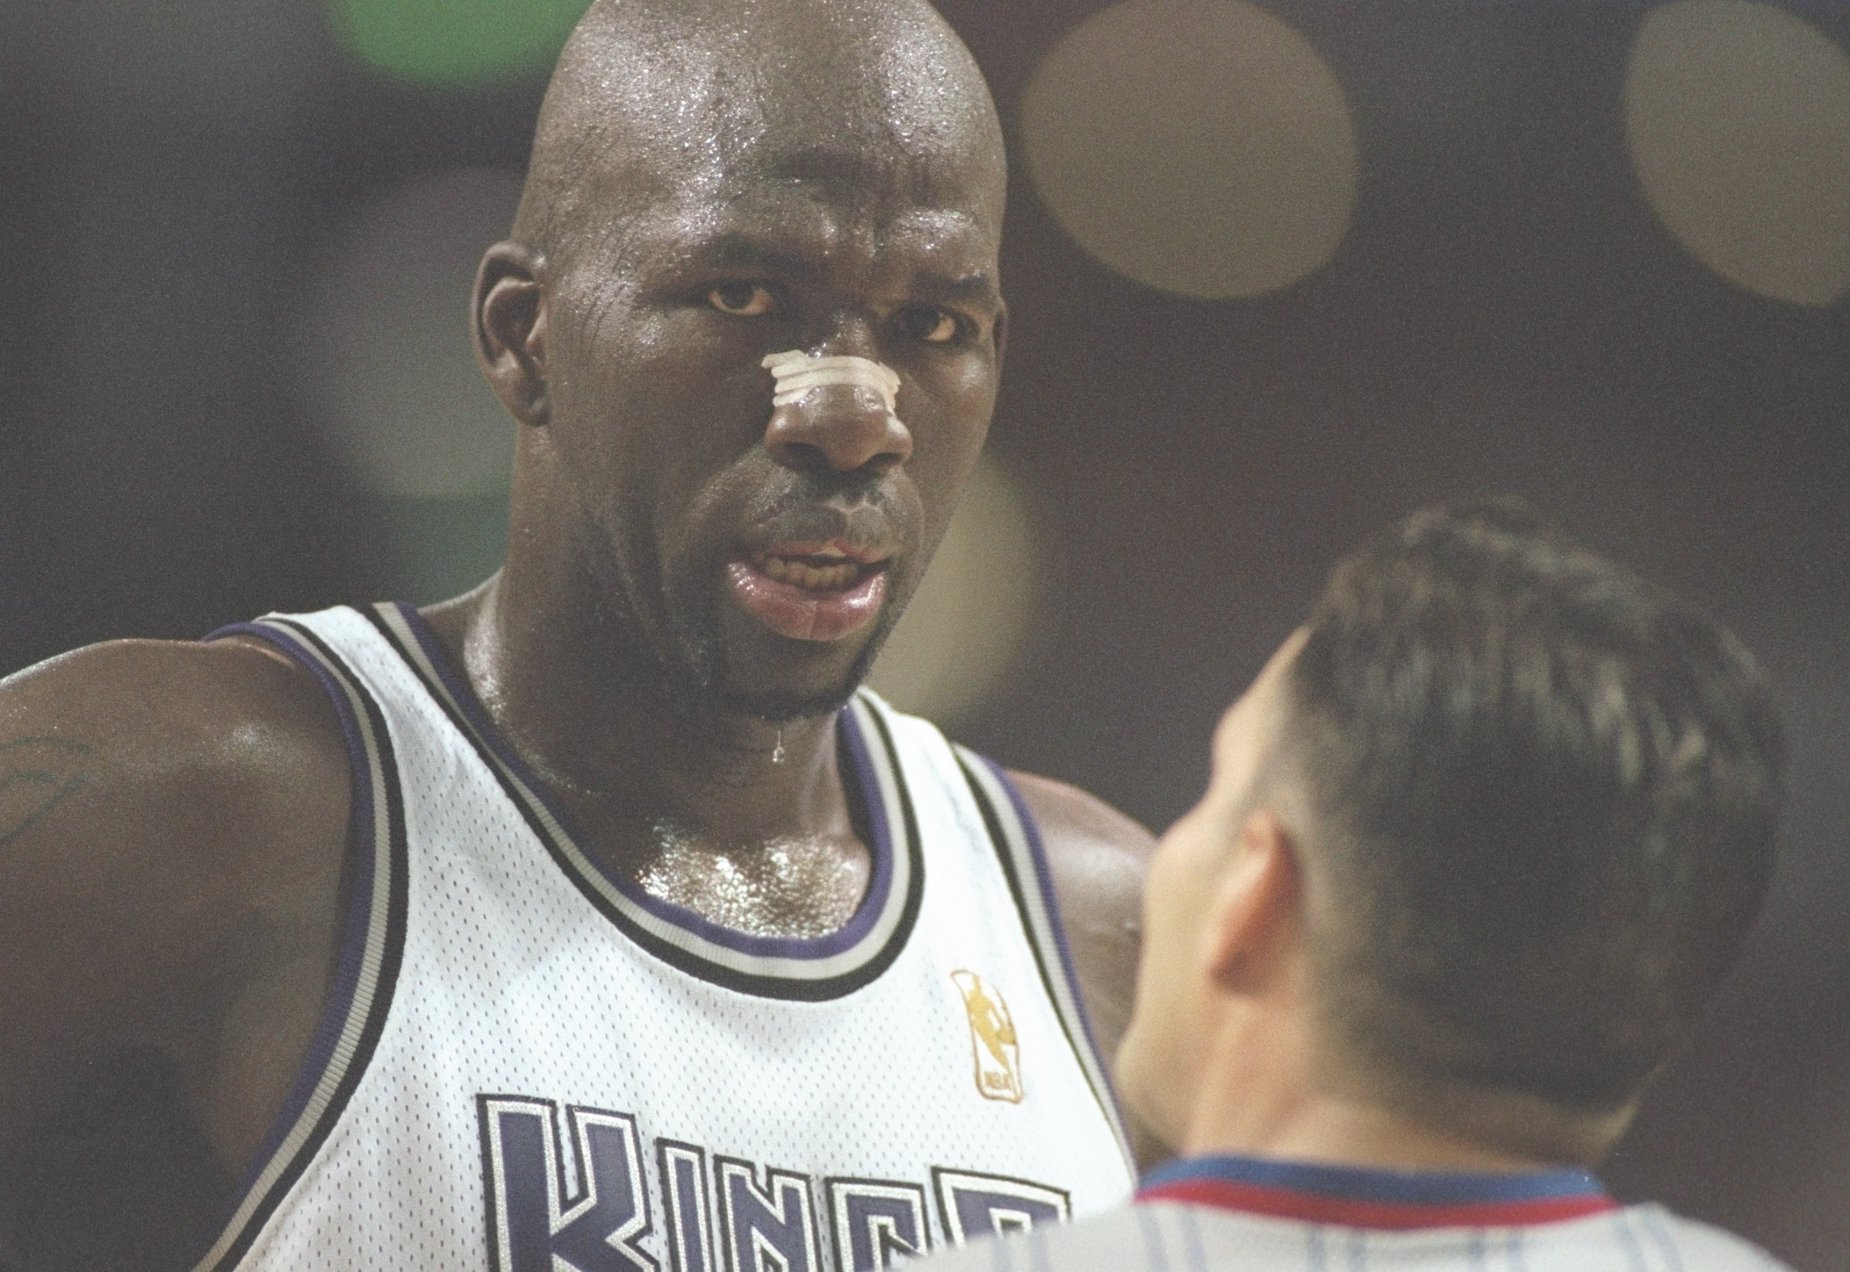 NBA veteran Olden Polynice recently revealed his scary encounter with COVID-19.